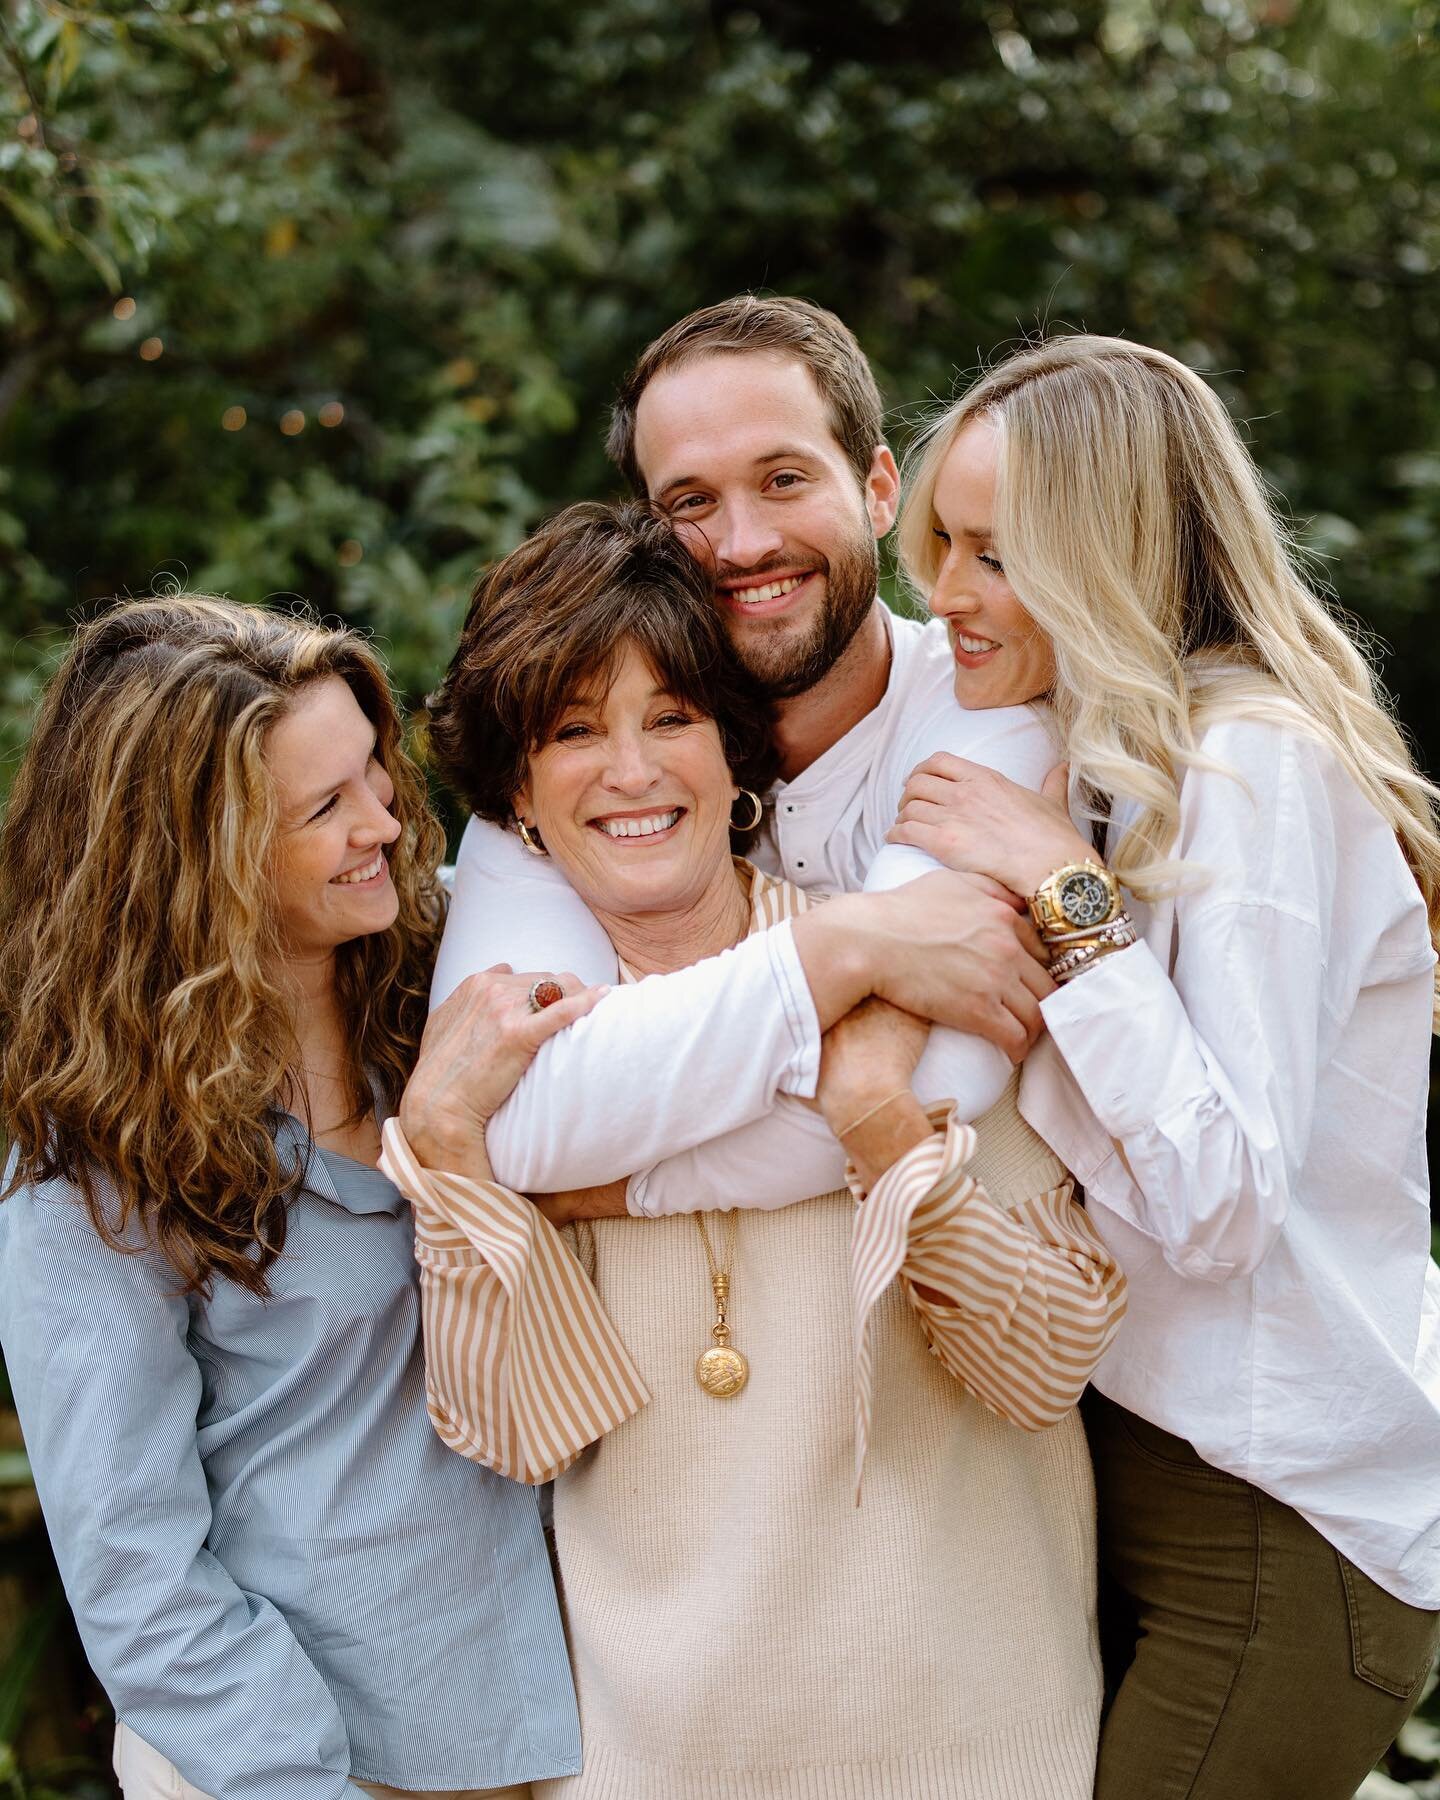 Can we all just agree that moms are the freaking best?!? That&rsquo;s all. 
&bull;
&bull;
&bull;
&bull;
&bull;
#sandiegophotographer #familyphotos #sandiegoportraitphotographer #sandiegobrandingphotographer #sandiegofamilyphotographer #engagementphot